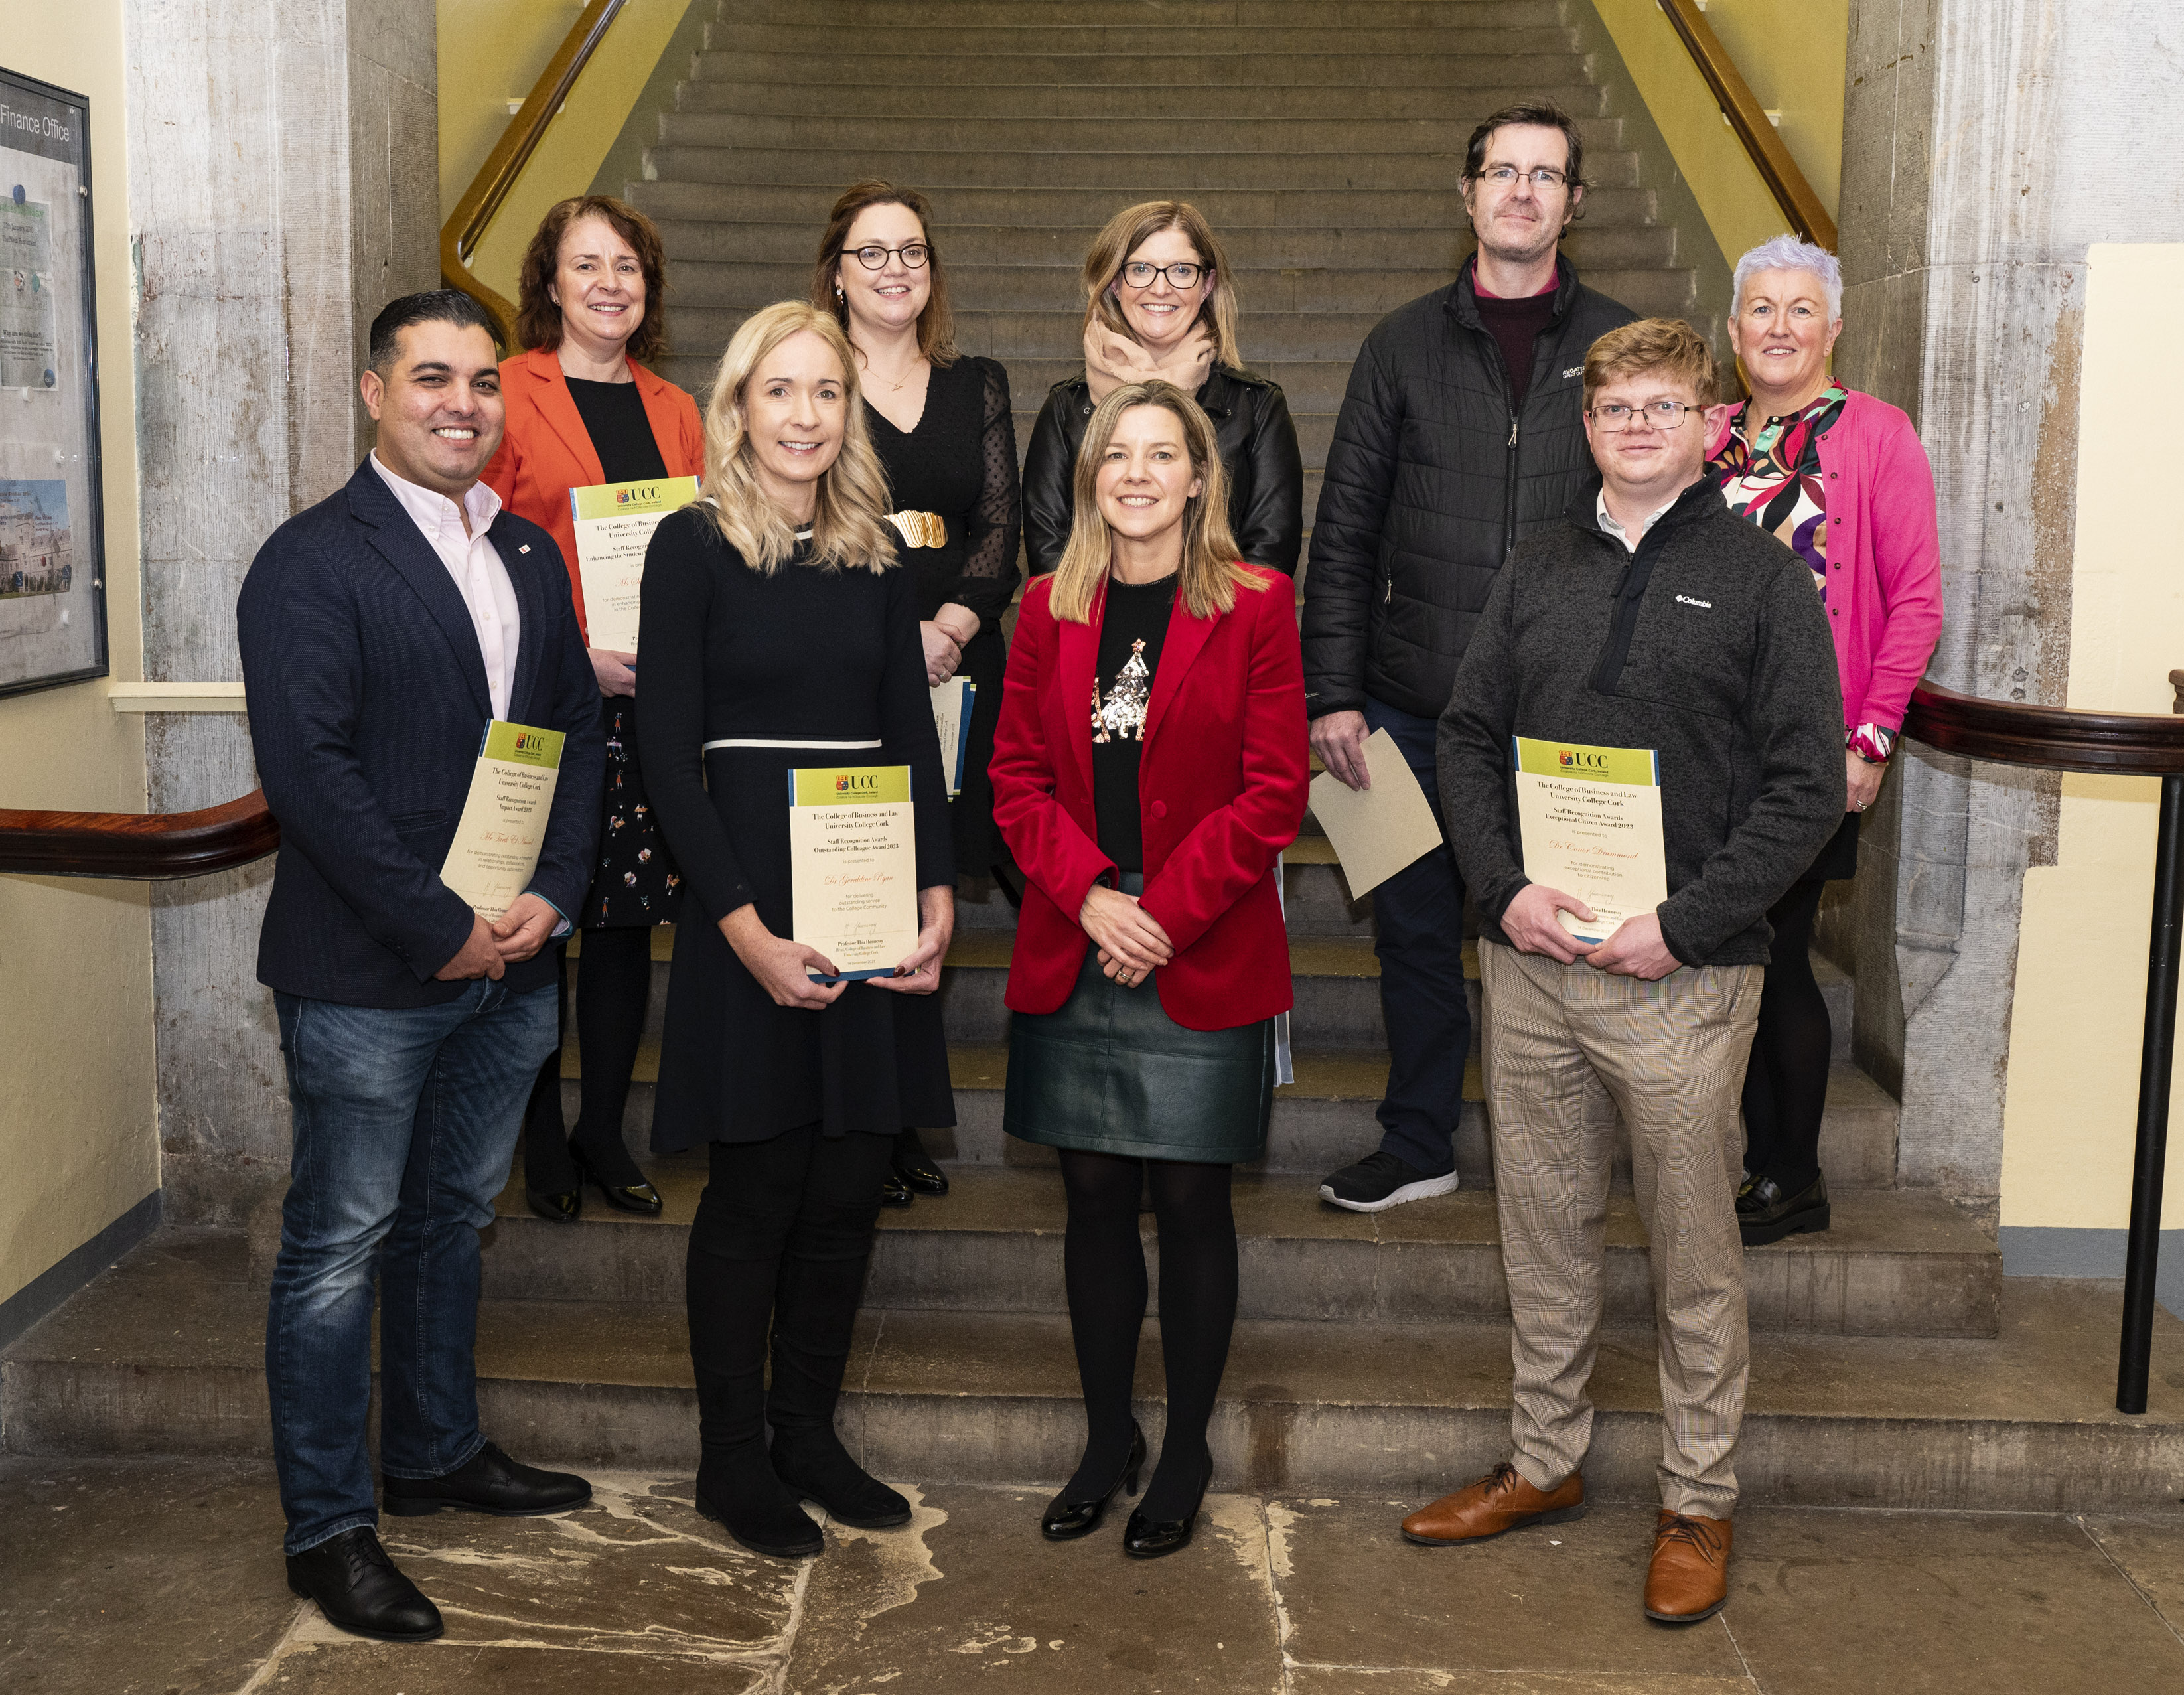 College Staff Recognition Award Recipients pictured at College Assembly 14 December 2023:  (front l-r) Tarik El Amoud, Dr Geraldine Ryan, Head of College Professor Thia Hennessy, Dr Conor Drummond; (back l-r) Ms Sinead Hackett, Dr Jane Bourke, Professor Ciara Heavin, Dr Paidi O'Reilly, HR Business Manager Ms Mags Walsh.  Not pictured are Award Recipients  Ms Ber Madden and Professor Louise Crowley.